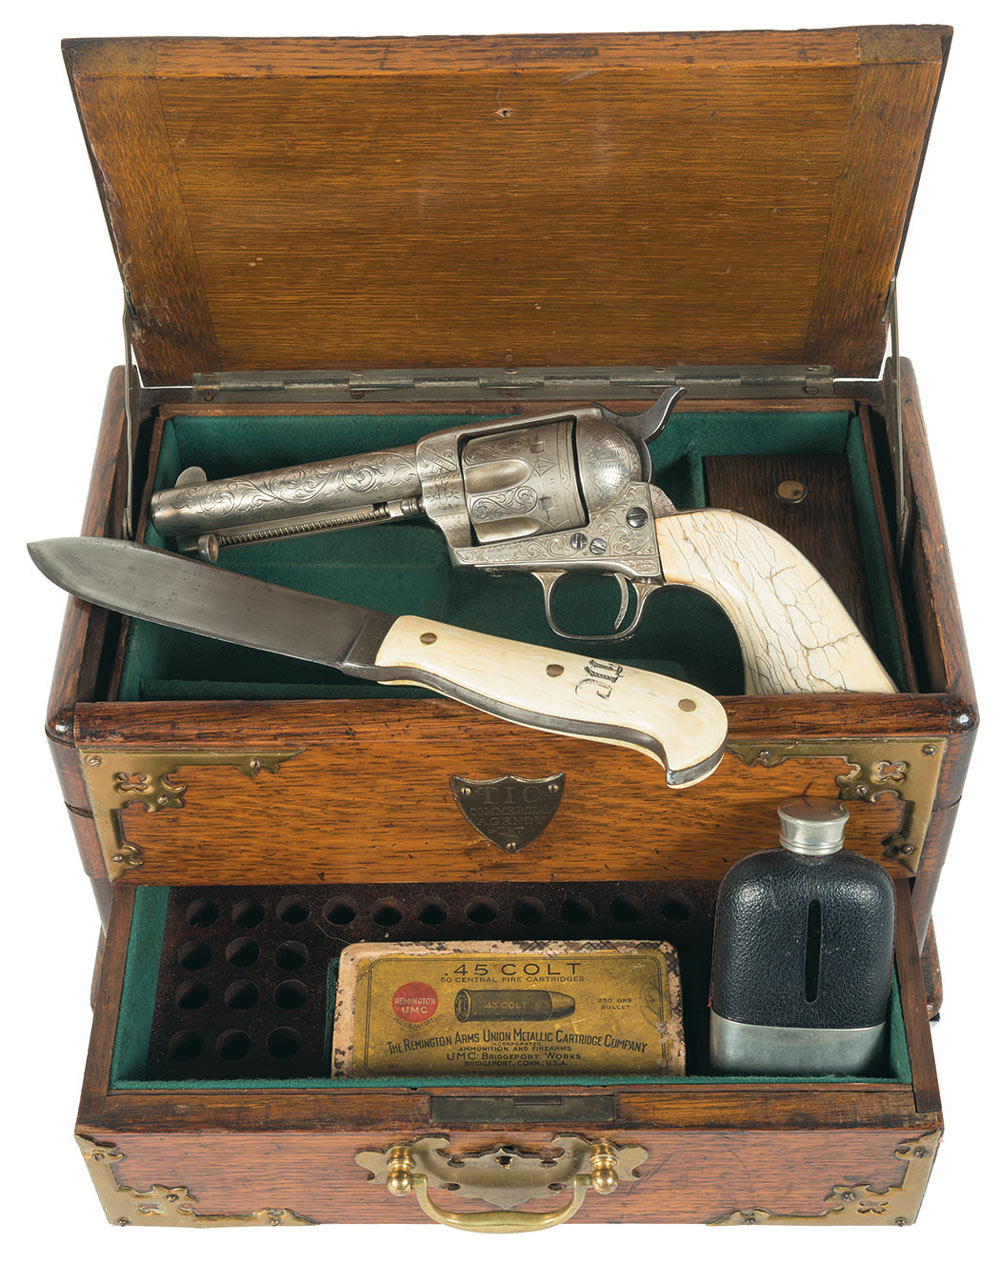 First Generation Colt Single Action Army Revolver with Case, Knife and Hip Flask, All Inscribed to Timothy "Longhair Jim" Courtright, Old West Gunfighter